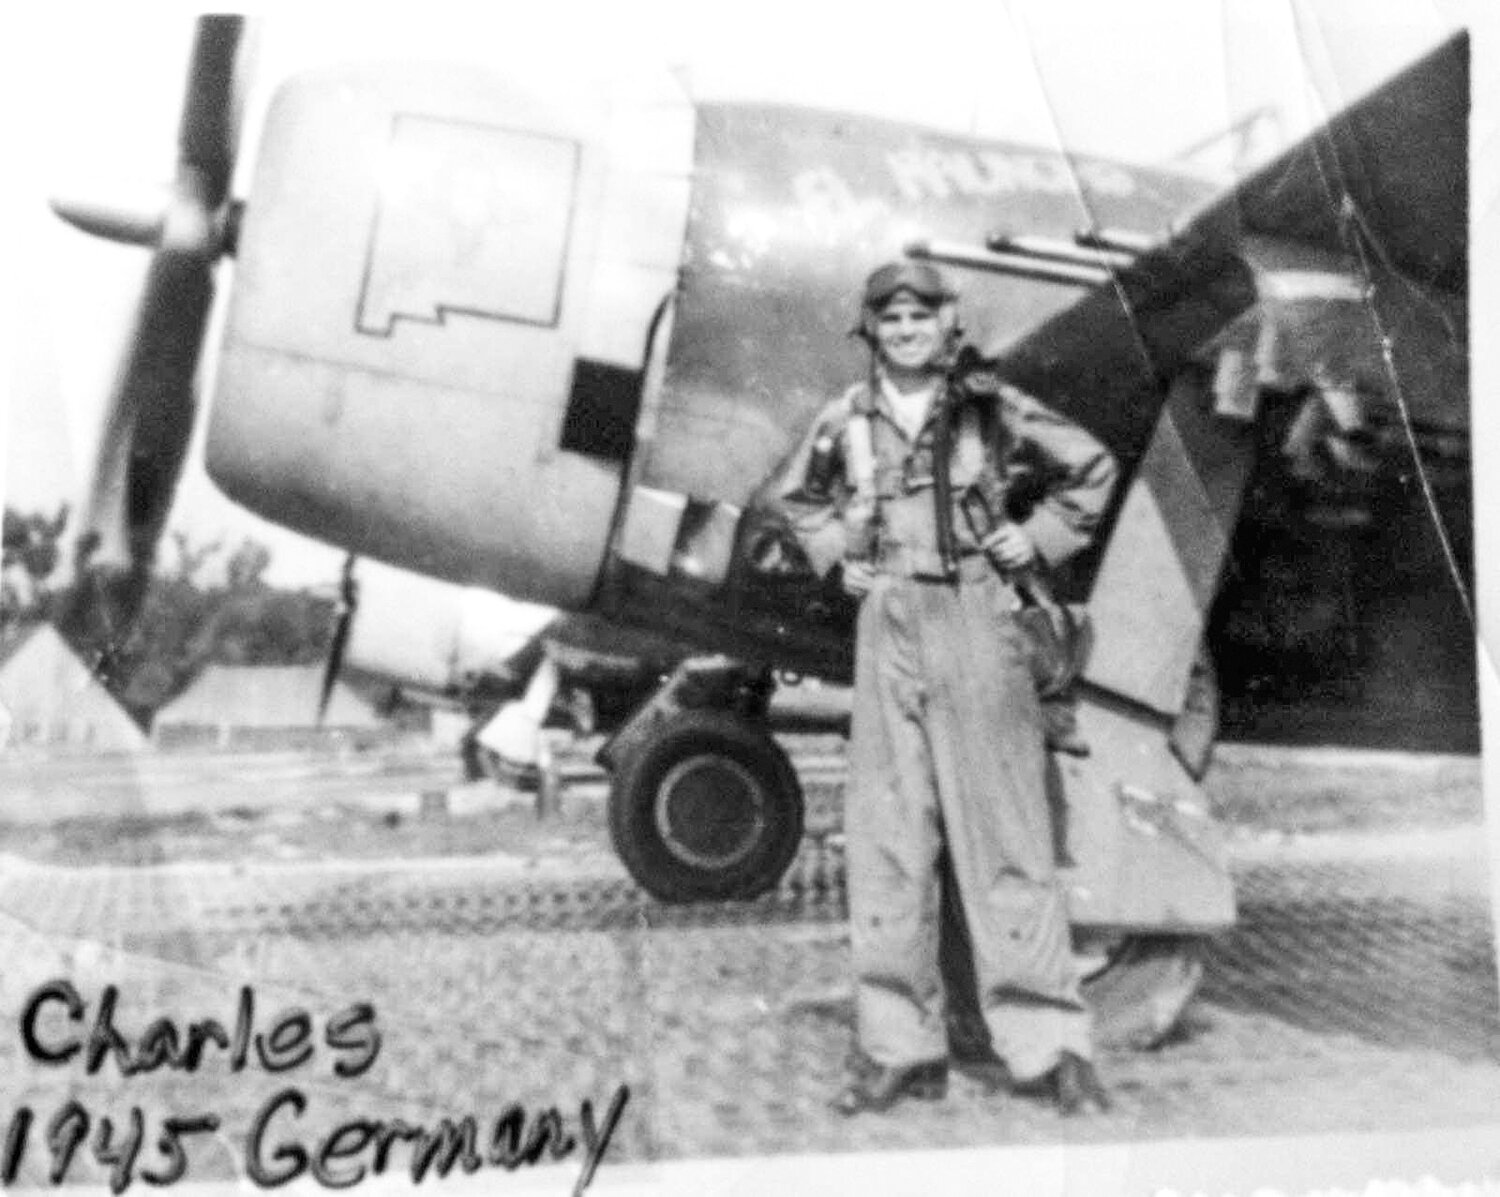 Charles Baldwin is pictured in front of an airplane in Germany in 1945.